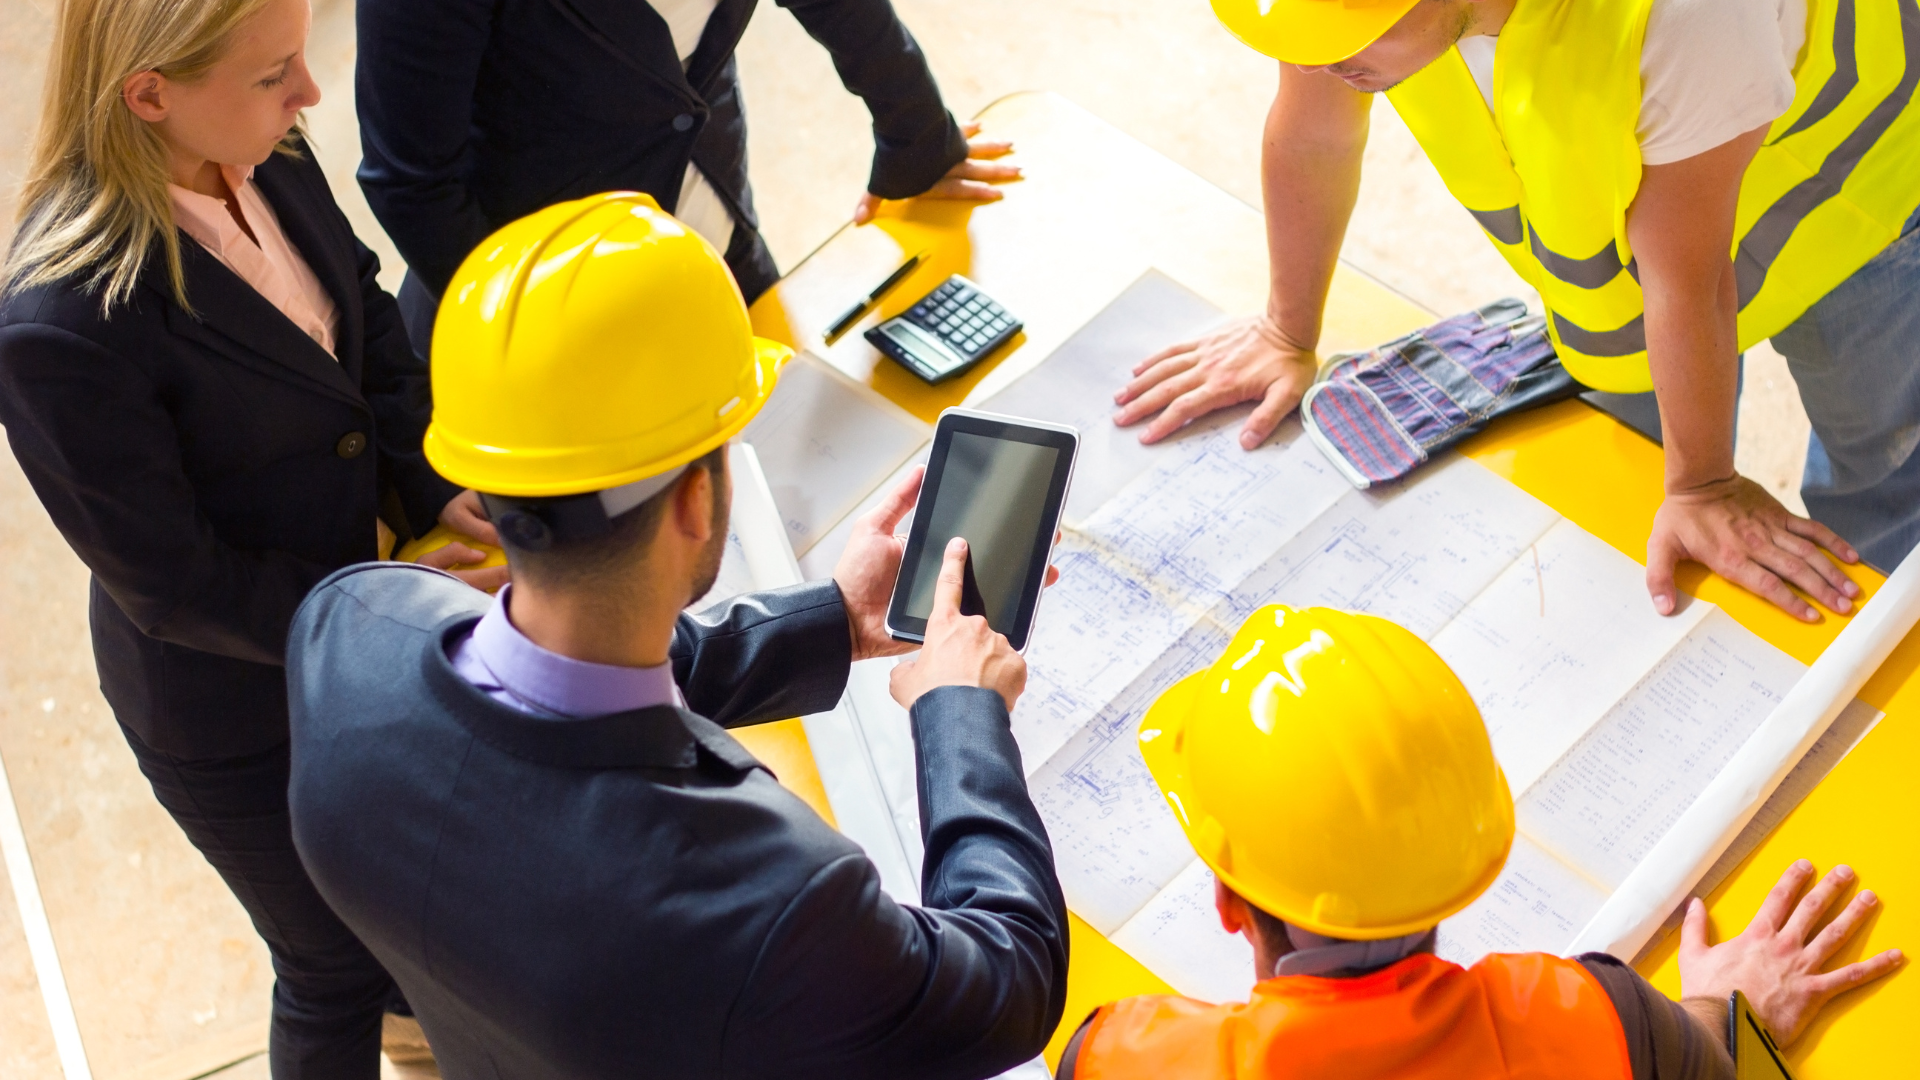 People in suits and people in construction attire and hard hats working together. Looking at blueprints and tablets.